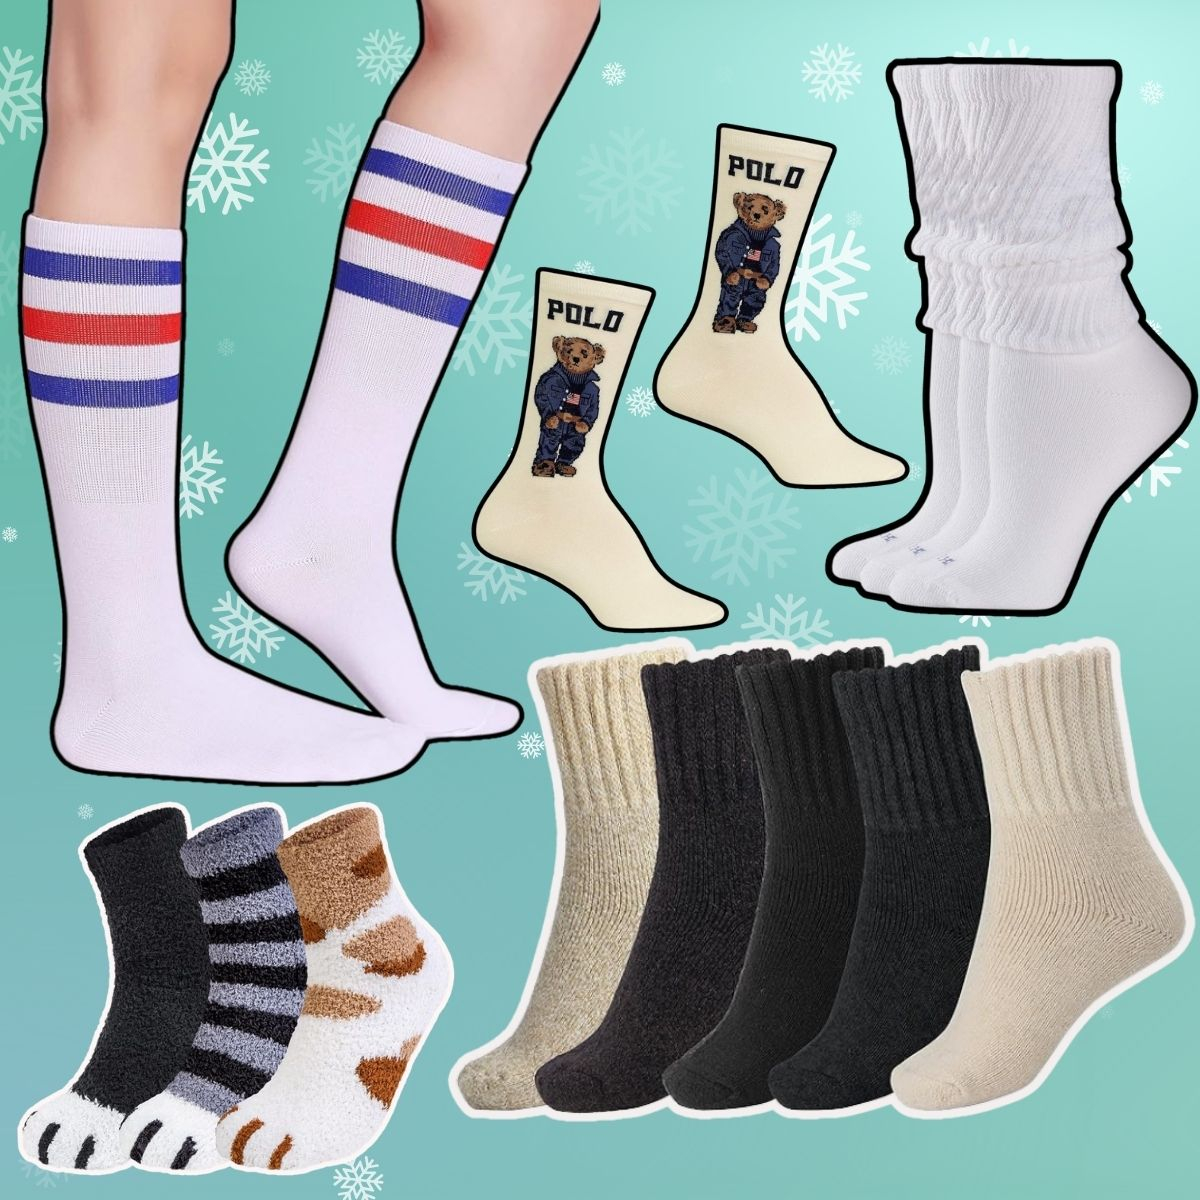 Socks 101: How many socks you should be wearing this winter